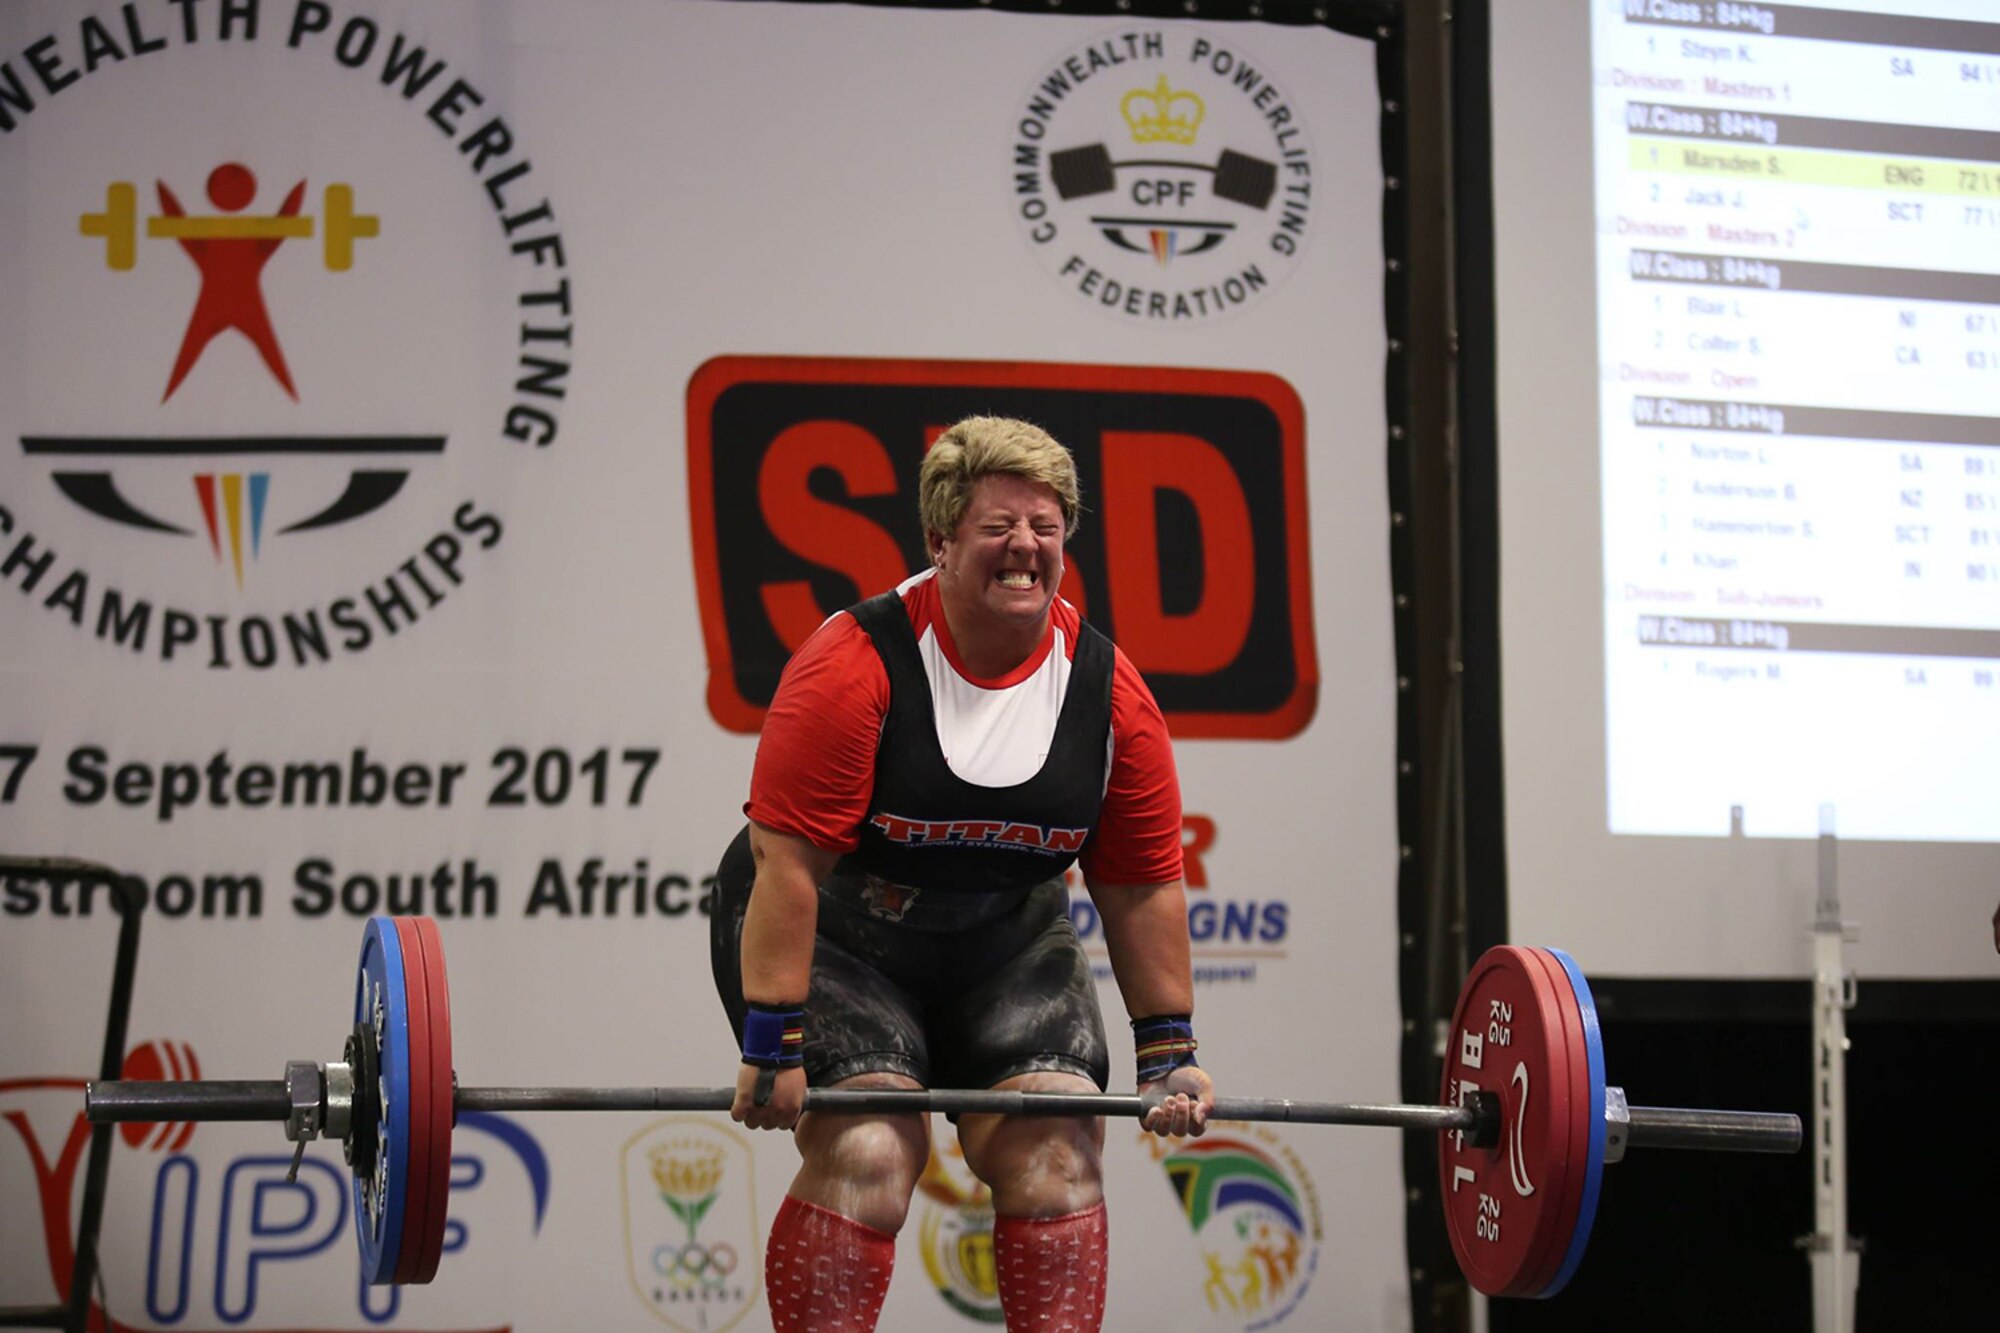 Sarah Marsden, 100th Civil Engineer Squadron environmental engineer, performs a deadlift of 167 kilograms (370 pounds) at the Commonwealth Powerlifting Championships in Potchefstroom, South Africa, in September 2017. The squat was a British record and earned Marsden a gold medal, in addition to the two gold medals she earned for the bench and deadlift categories. (Courtesy photo by Grant Hendry-Horne)